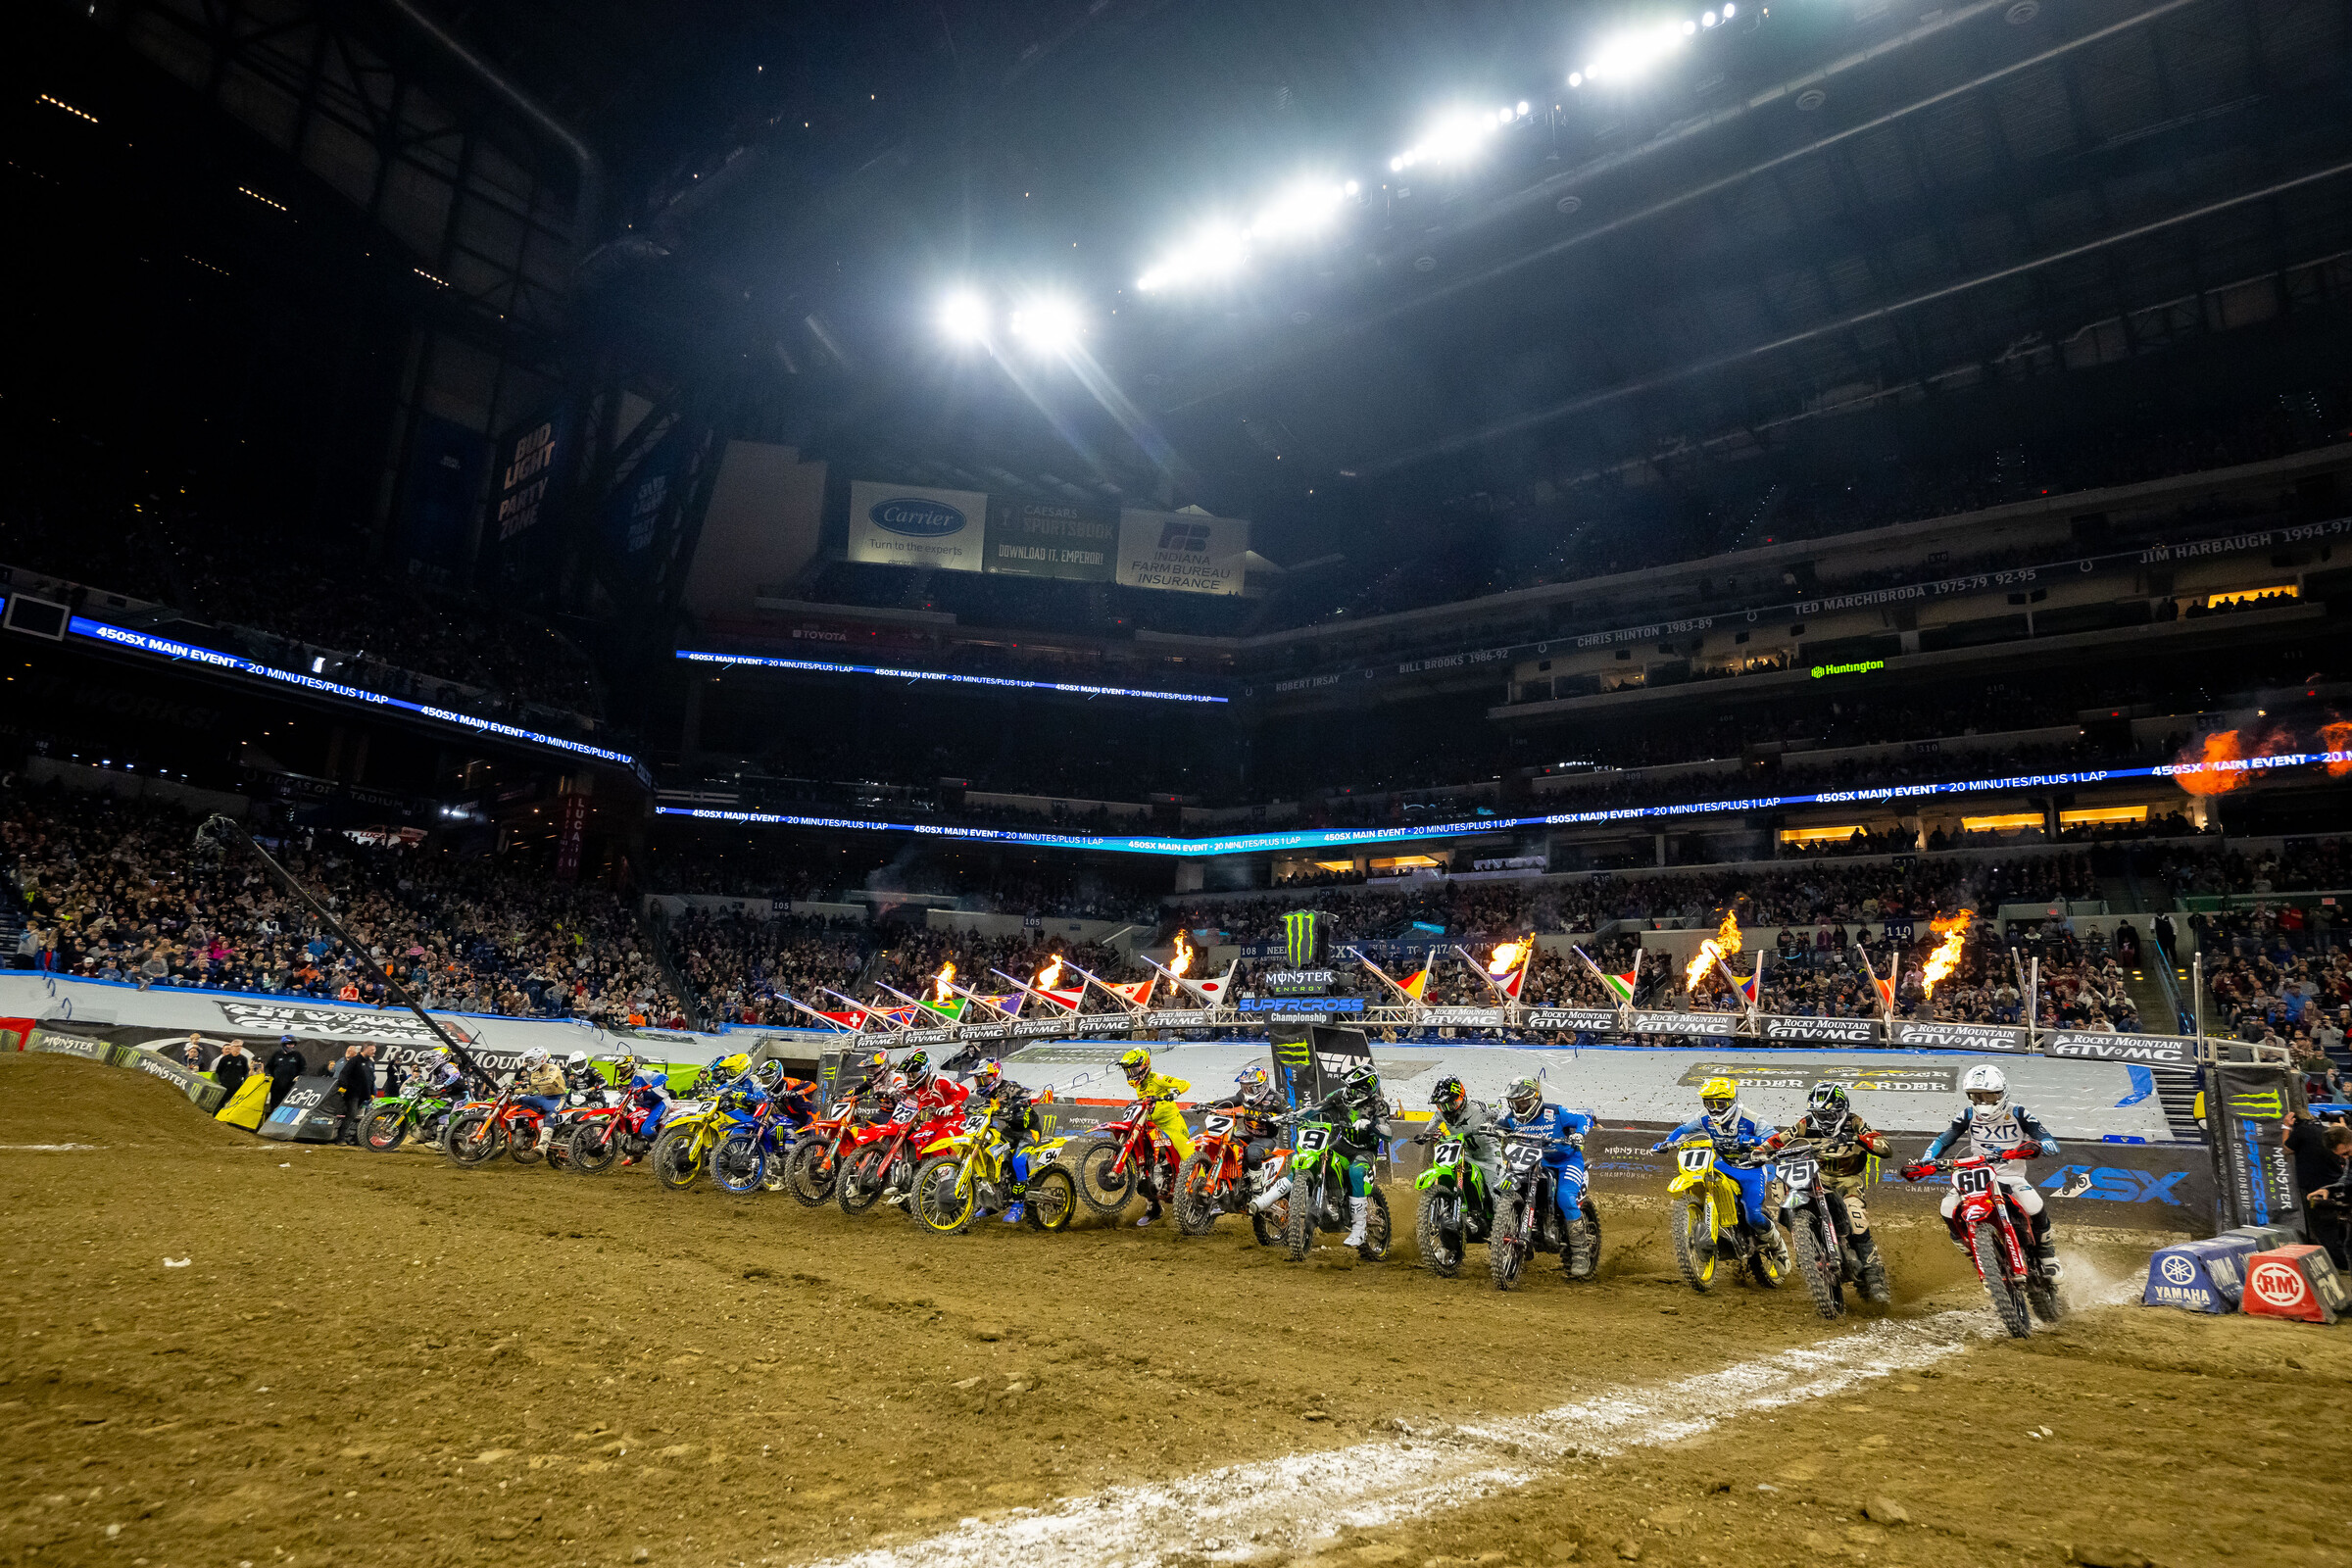 supercross 2022 Monster Strength Supercross Tickets Up to 35% Off Nationwide